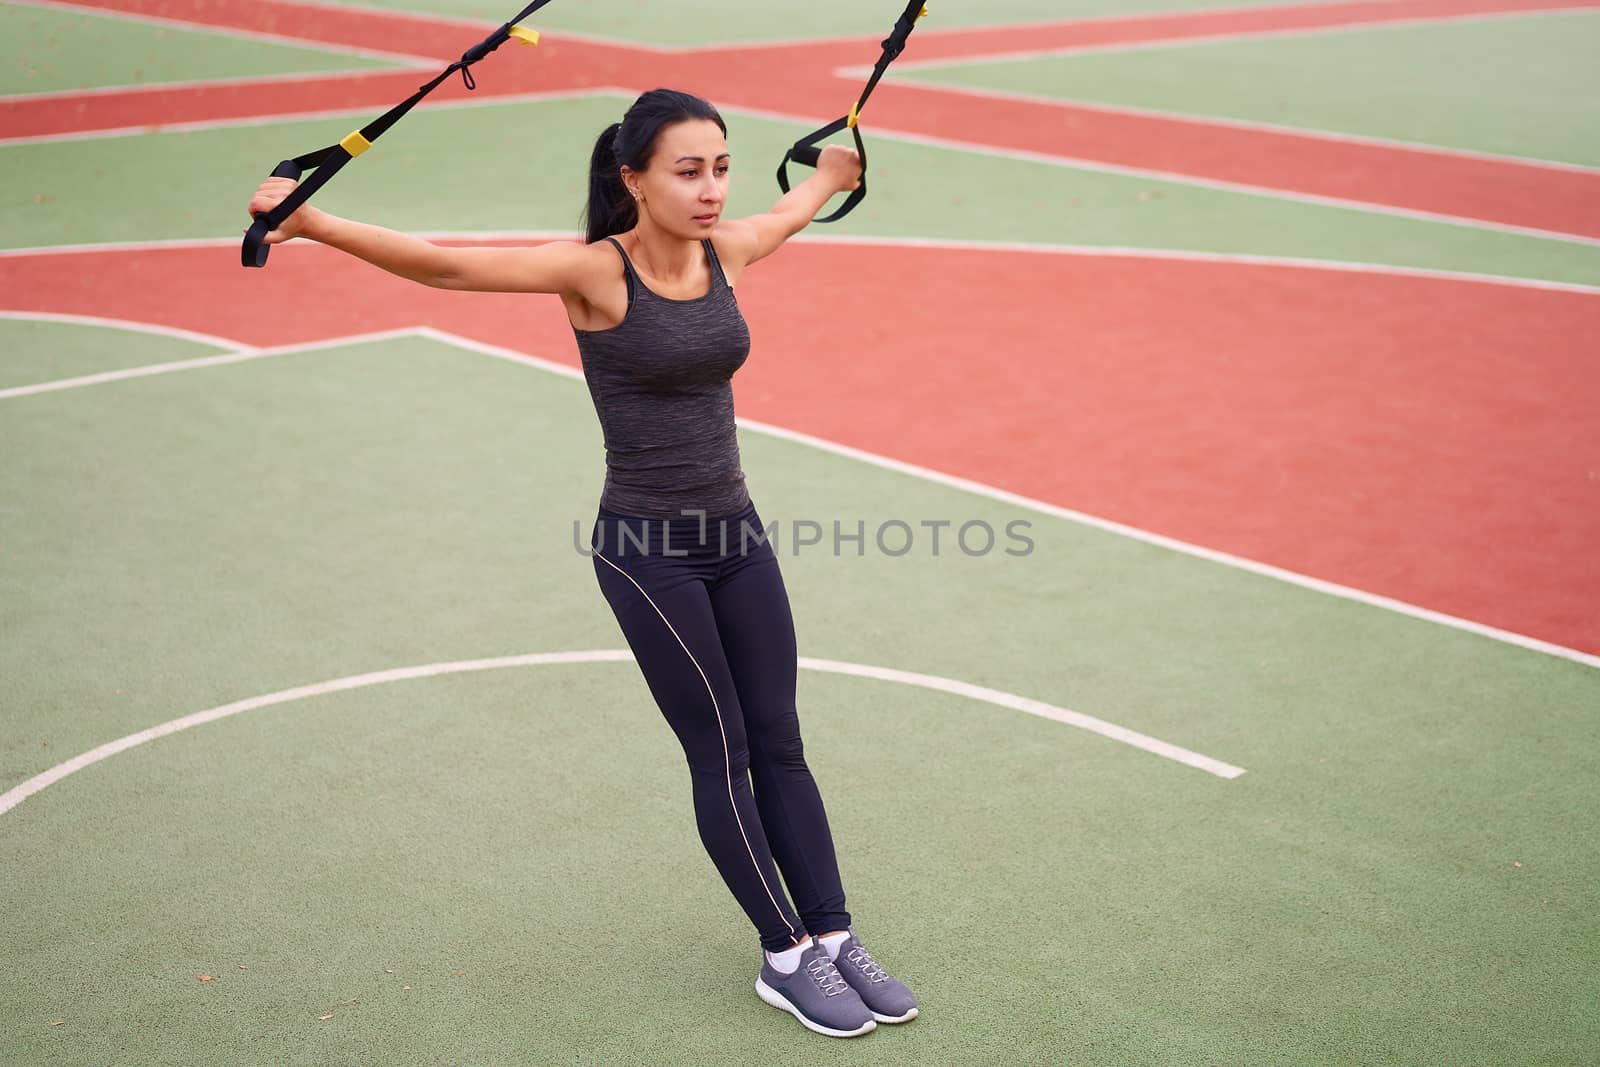 Girl athlete training using trx sportground Mixed race young adult woman workout suspension system Healthy lifestyle Stretching outdoors playground. Make your body machine